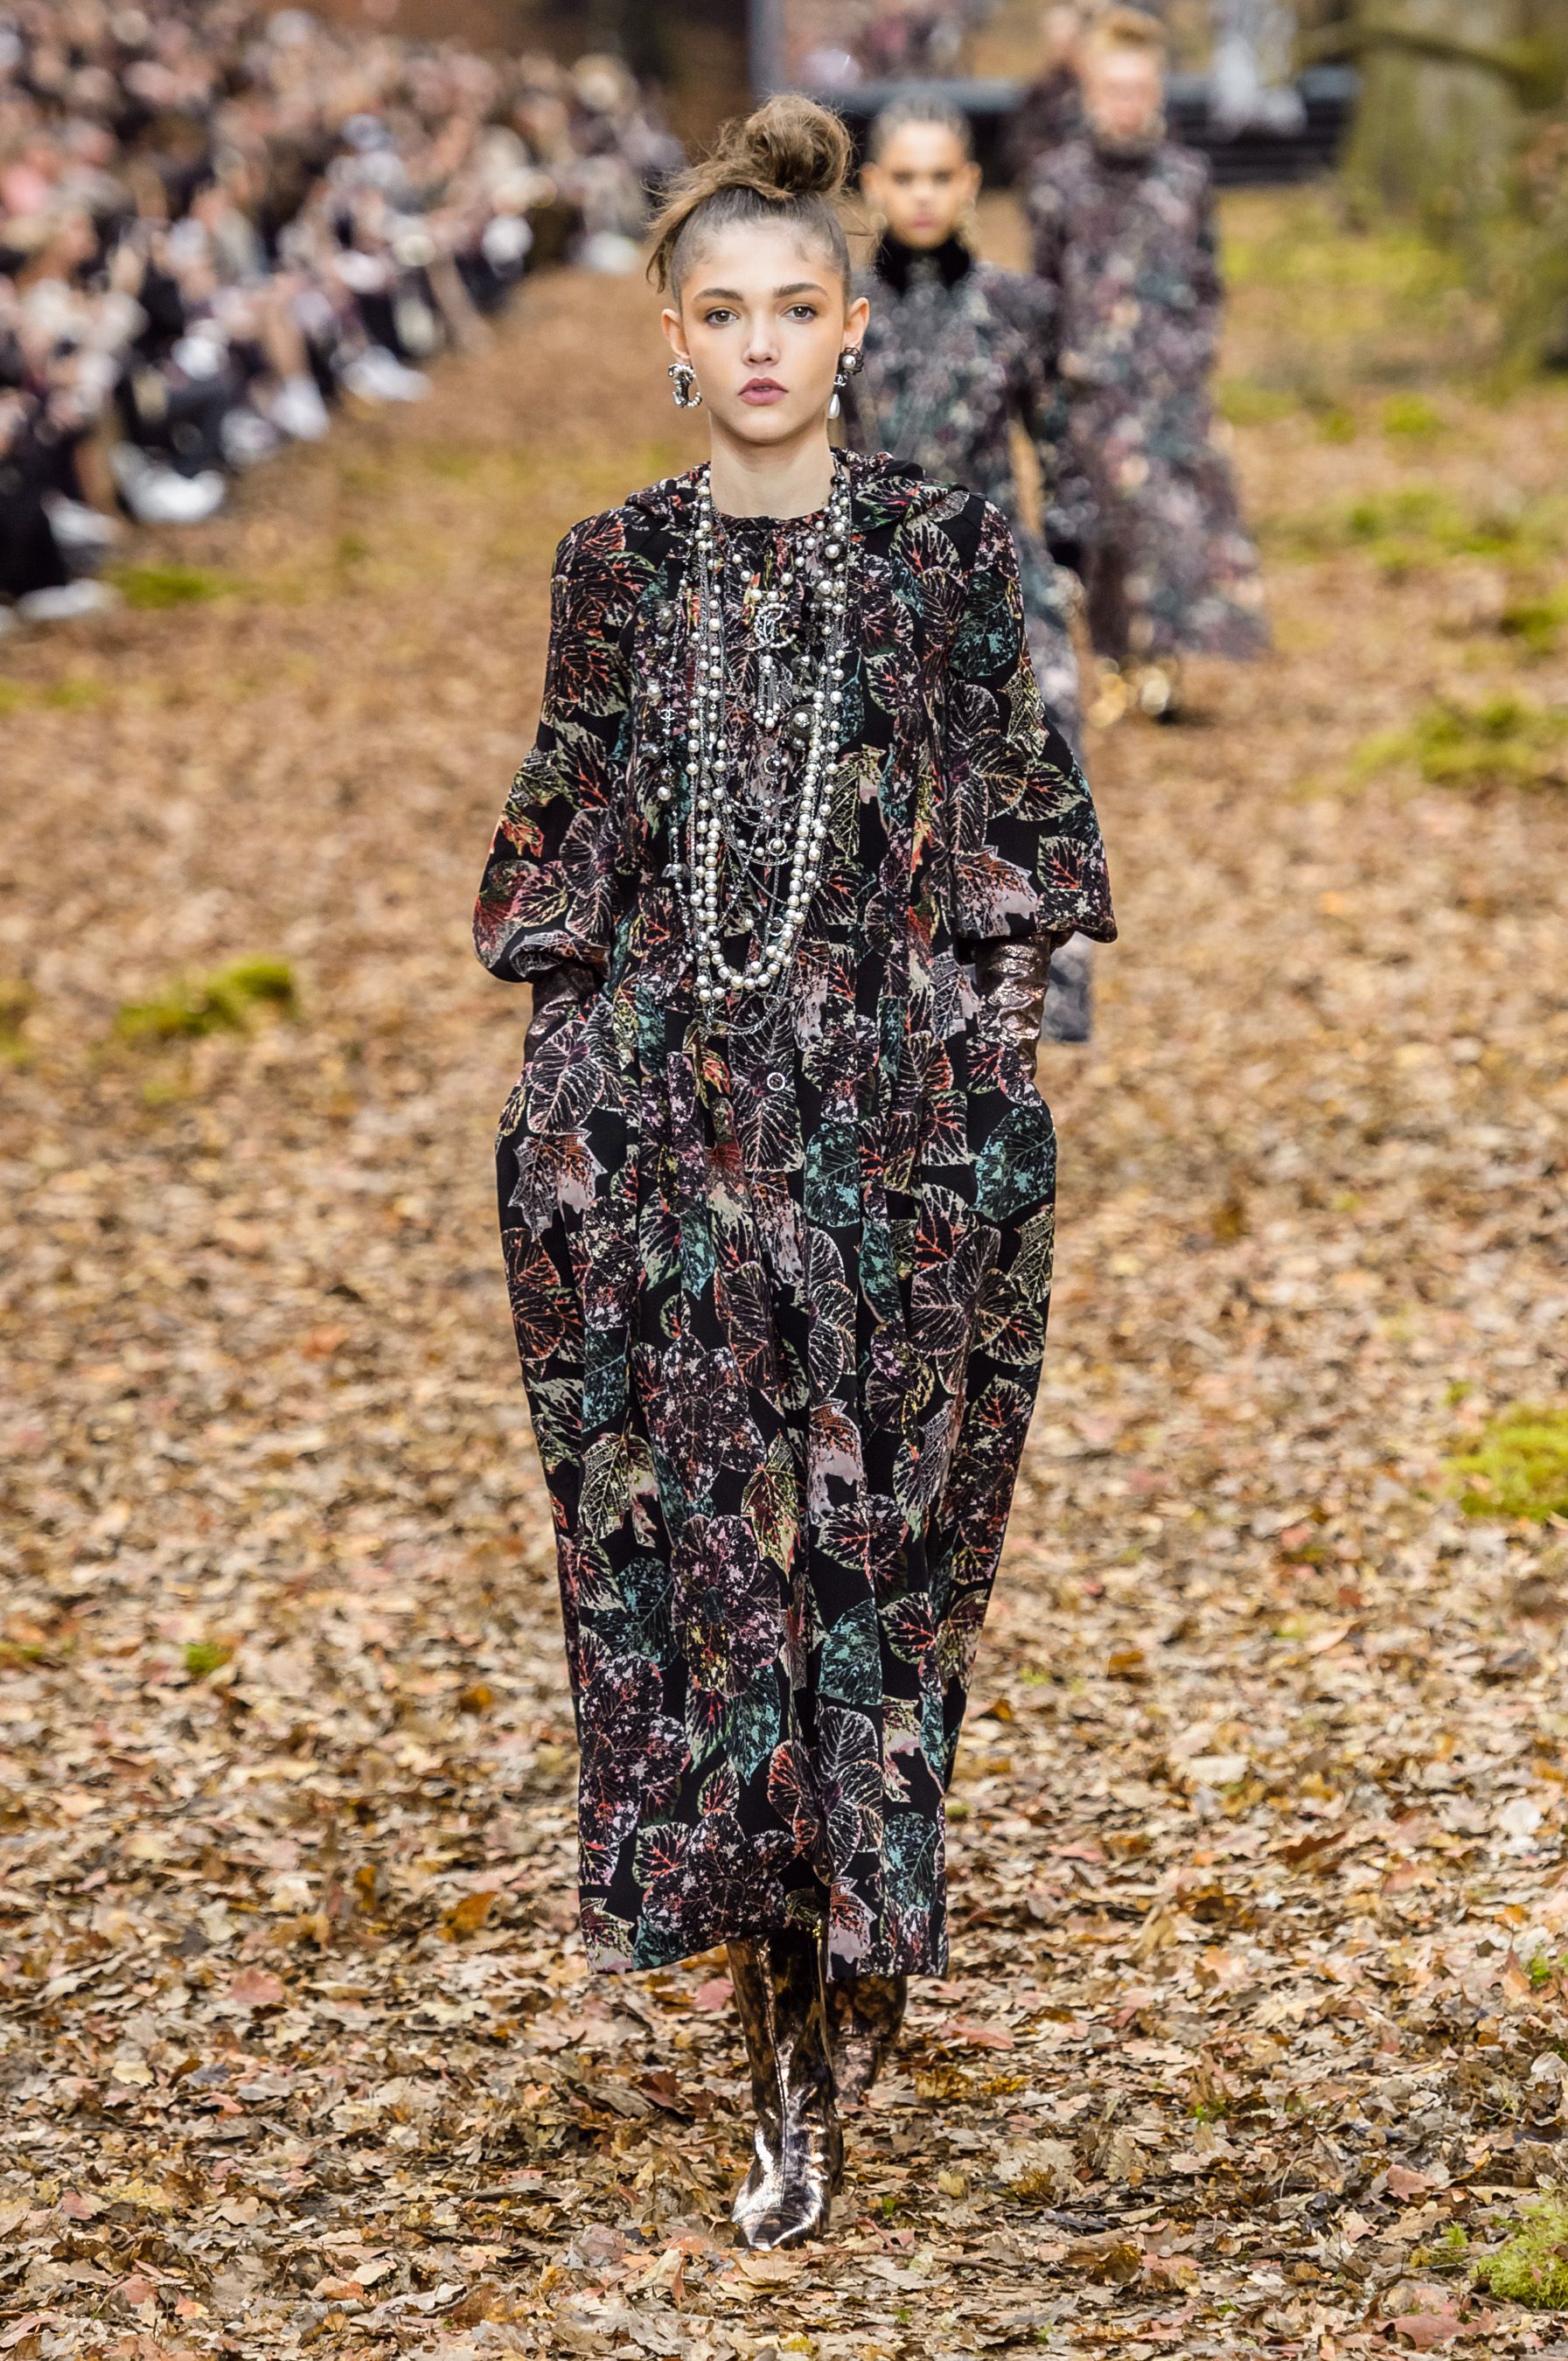 postkontor slå Arving 81 Looks From Chanel Fall 2018 PFW Show – Chanel Runway at Paris Fashion  Week